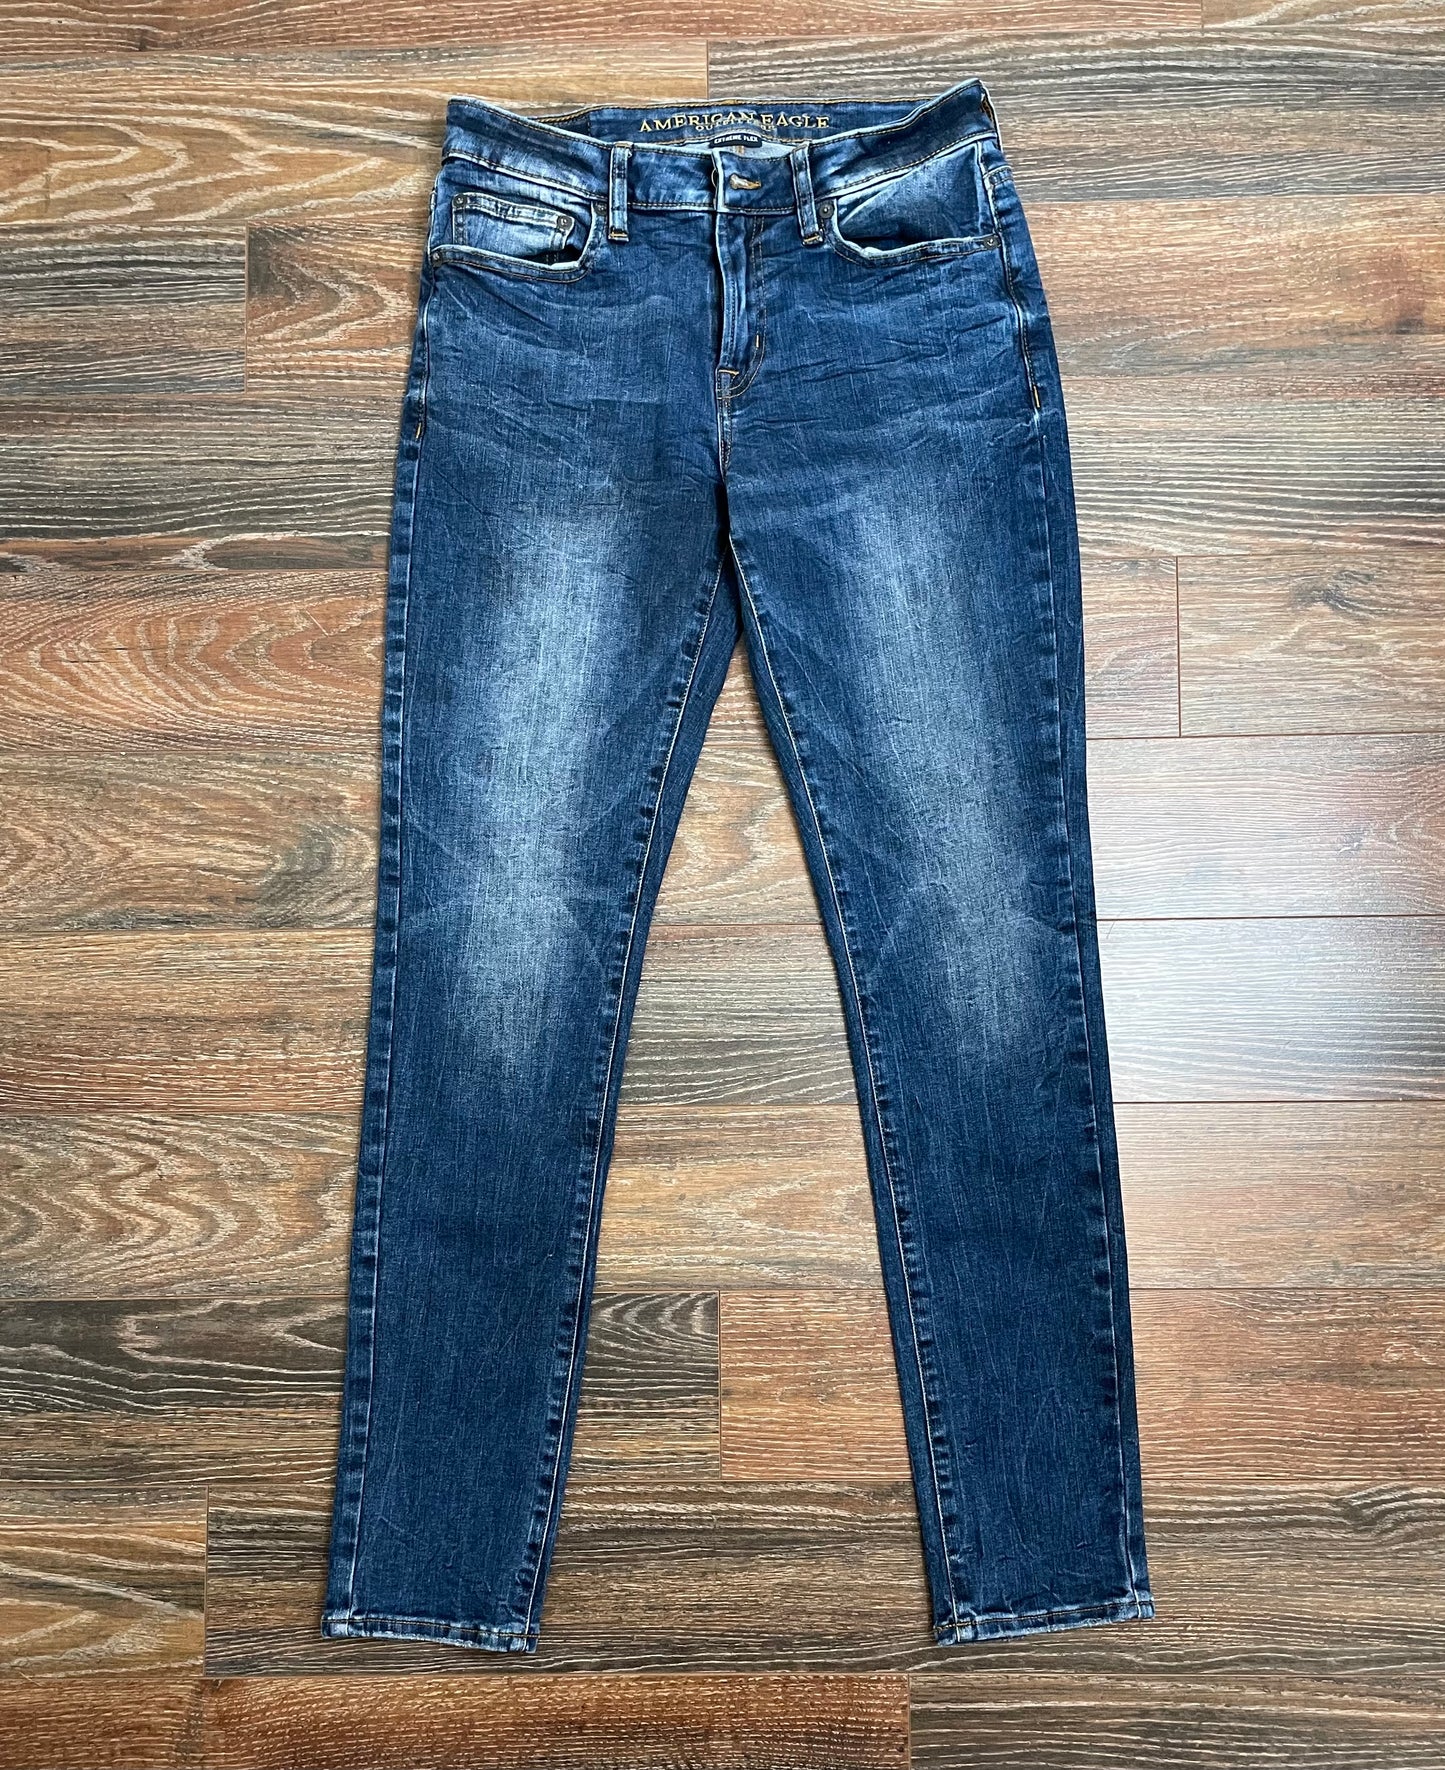 Men’s American Eagle Outfitters Jeans (30x32)